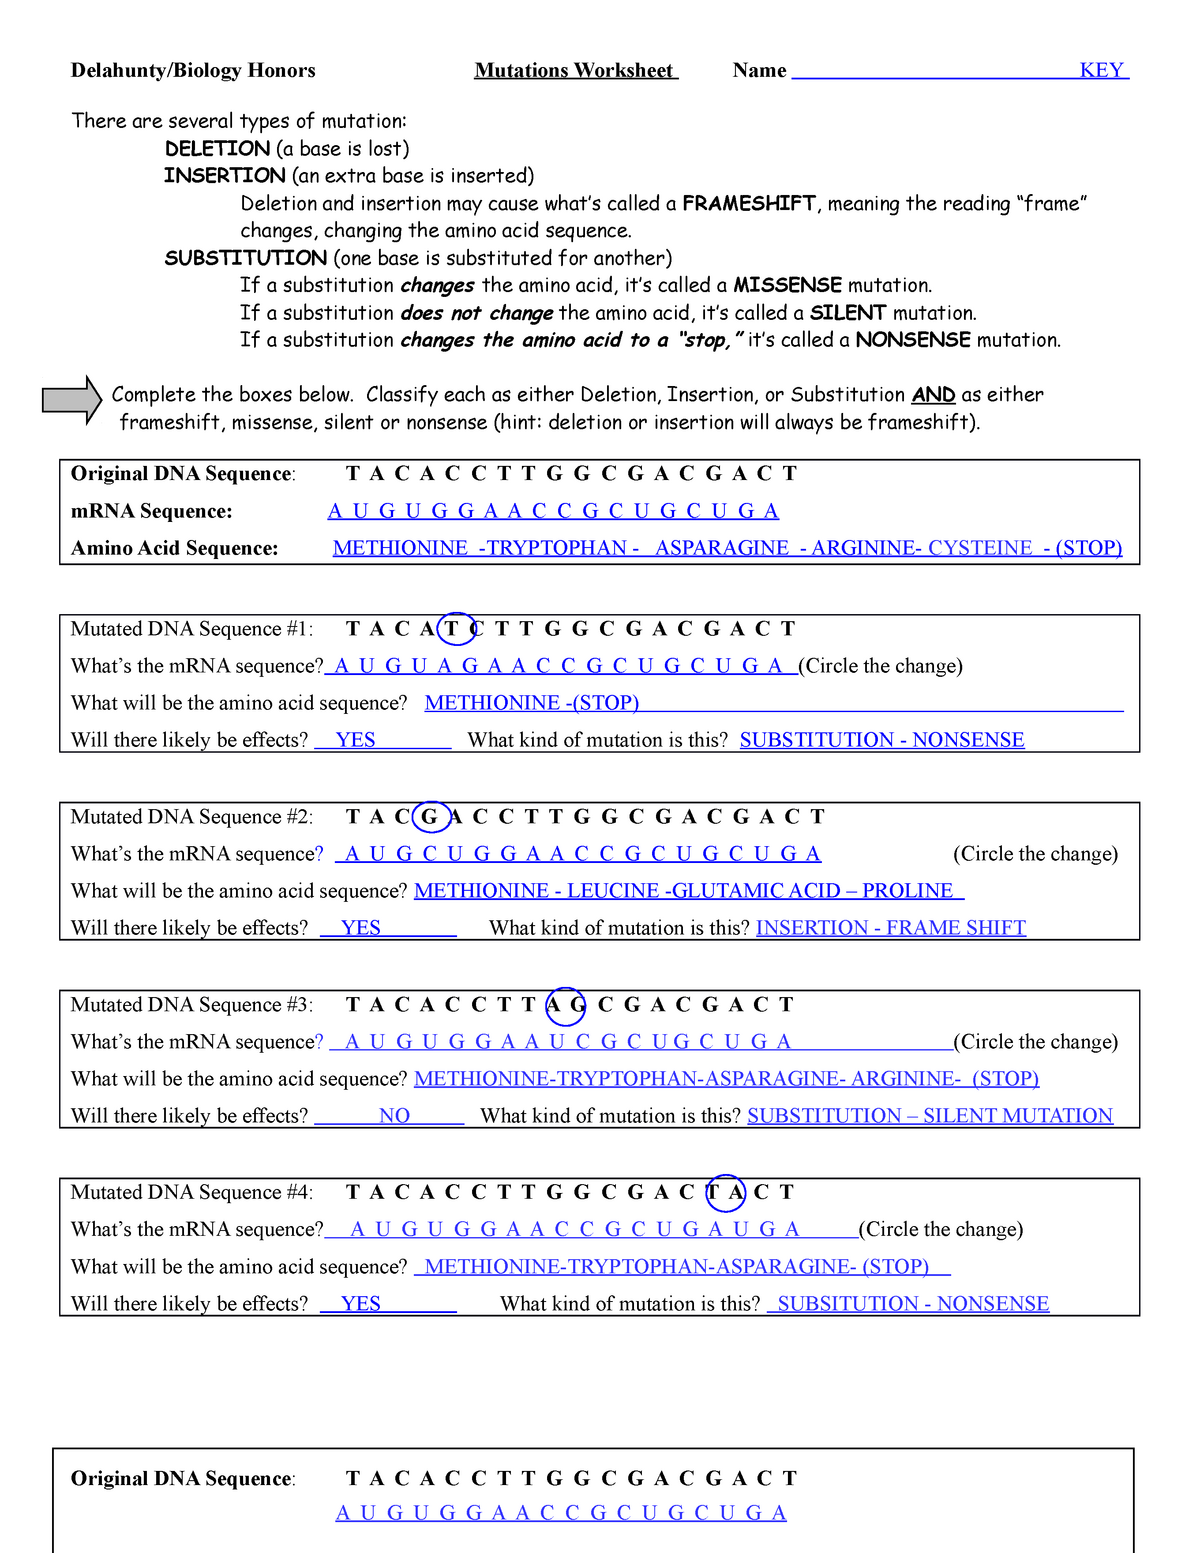 Mutations - WS - KEY - Sonal Tonger - StuDocu With Dna Mutations Practice Worksheet Answers